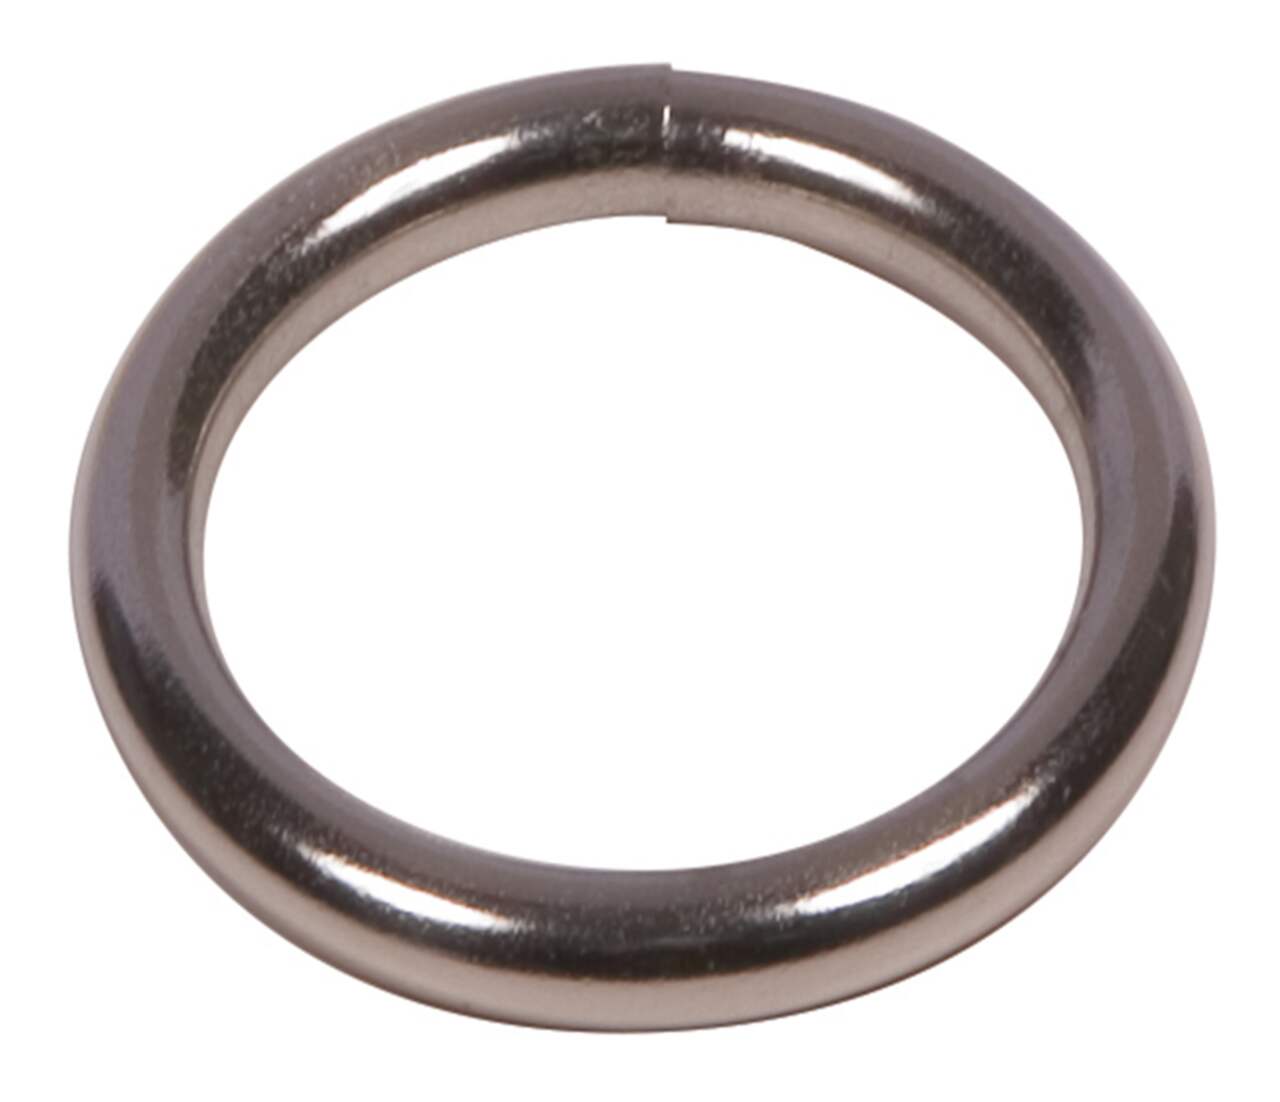 Ben-Mor Harness Ring, Nickel-Plated, Assorted Sizes